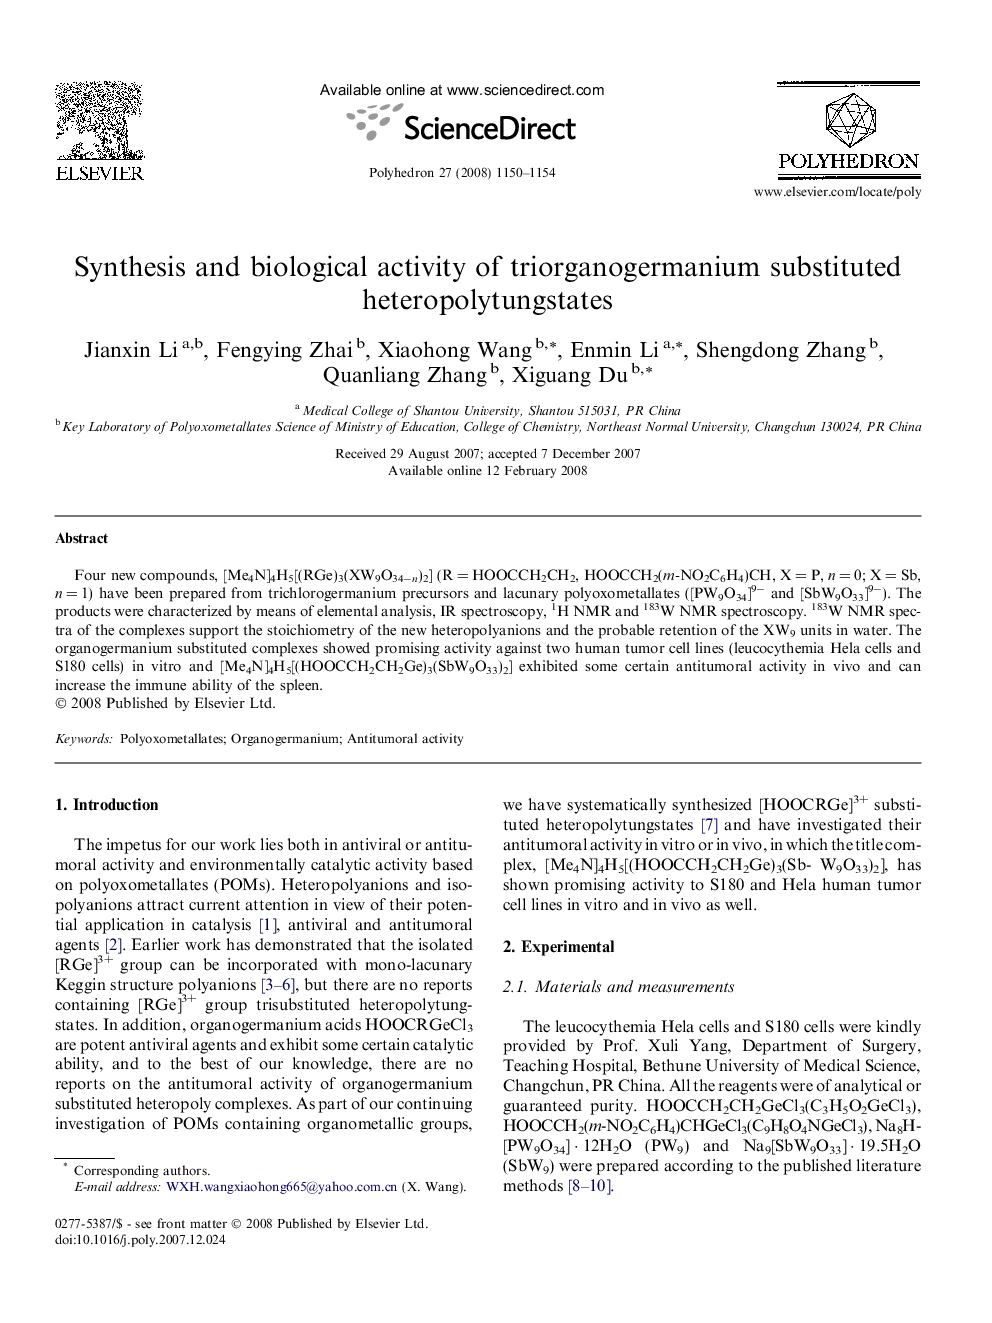 Synthesis and biological activity of triorganogermanium substituted heteropolytungstates